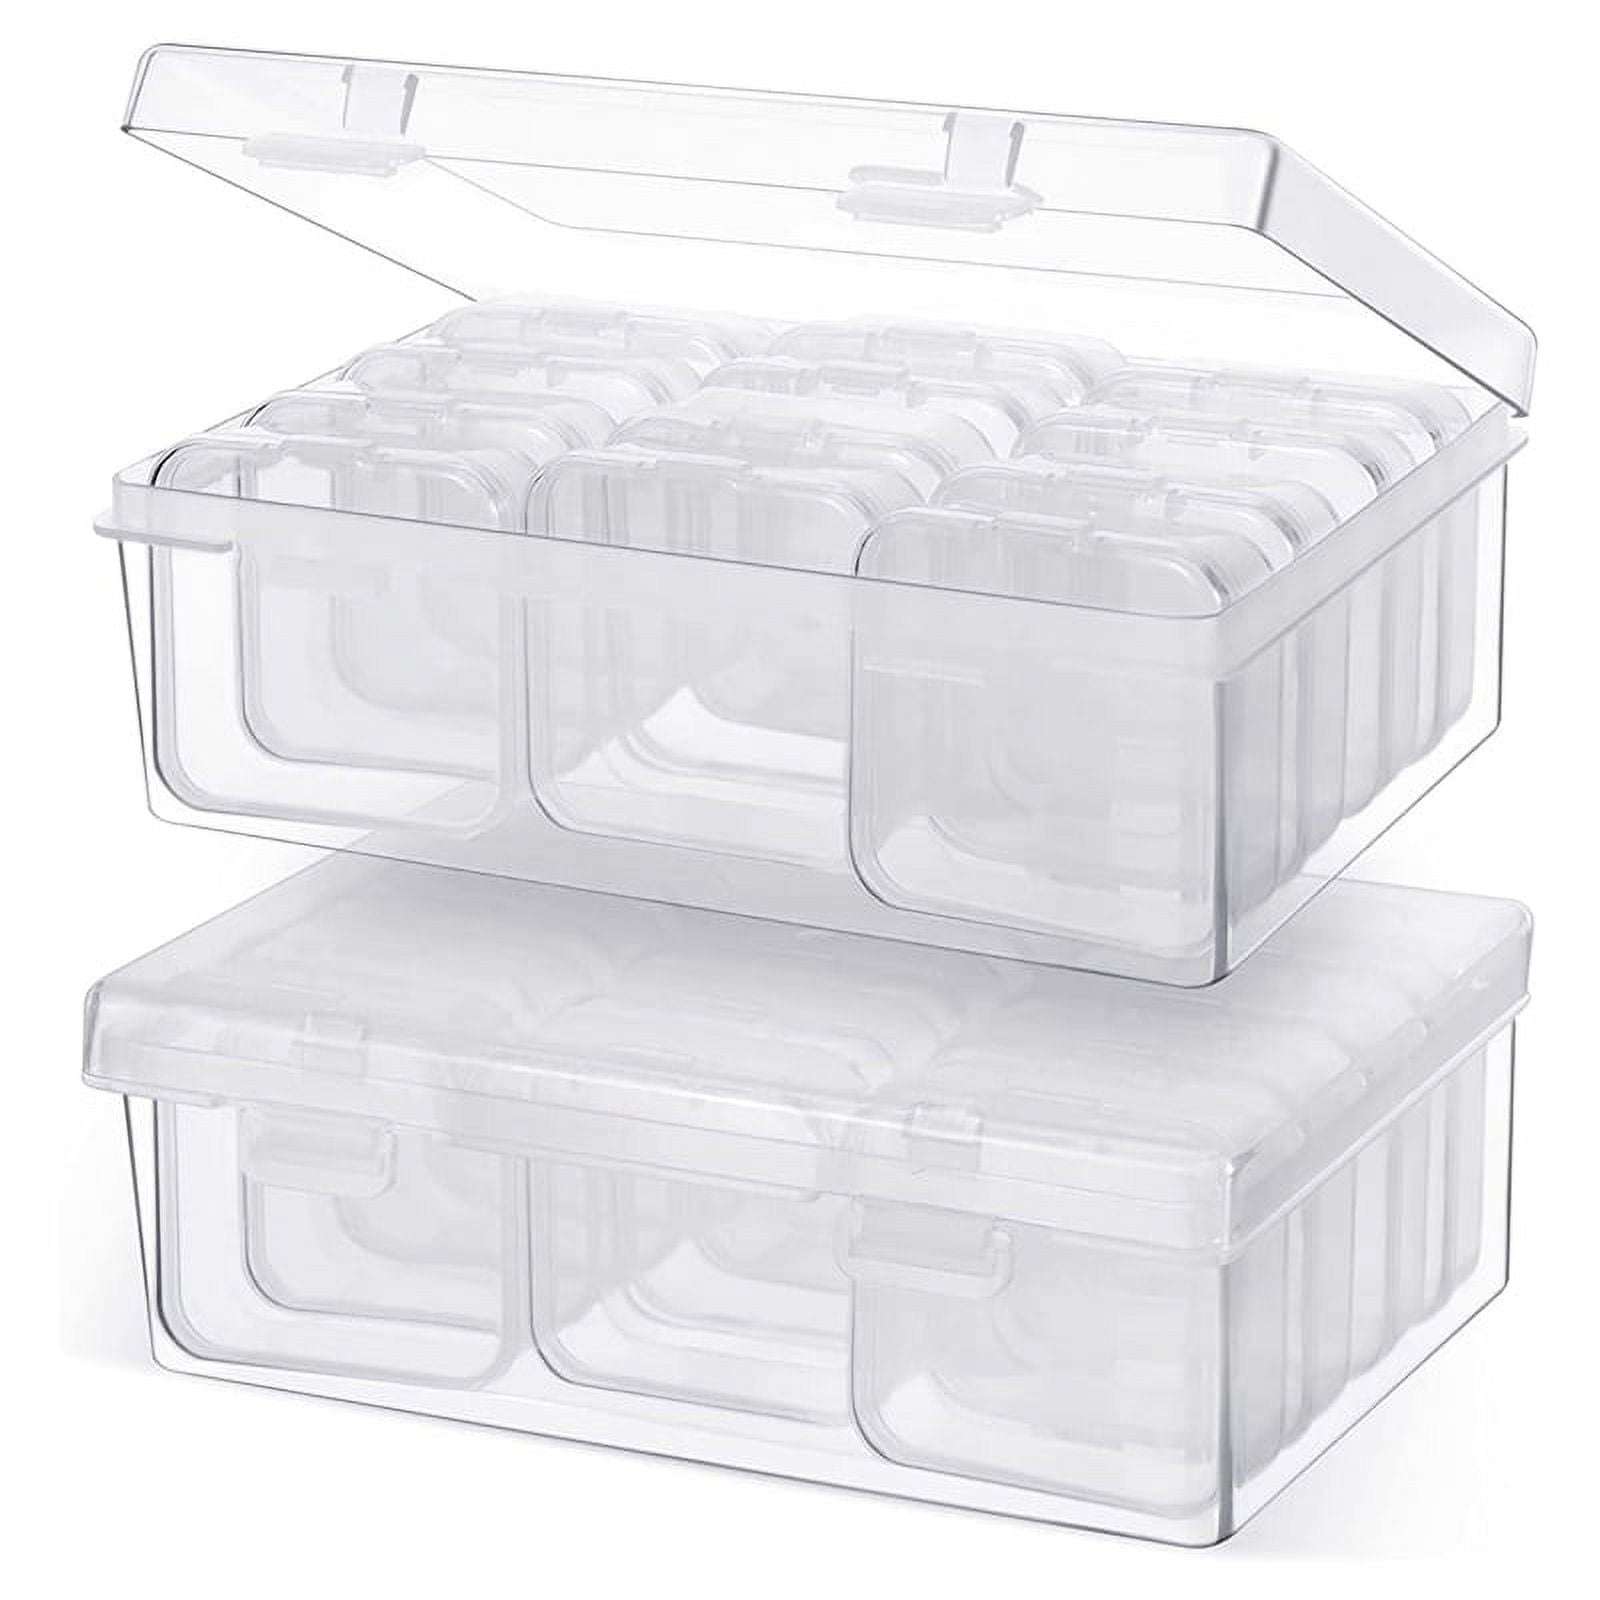  36 PCS Small Bead Organizers with 3 PCS Hinged Lid